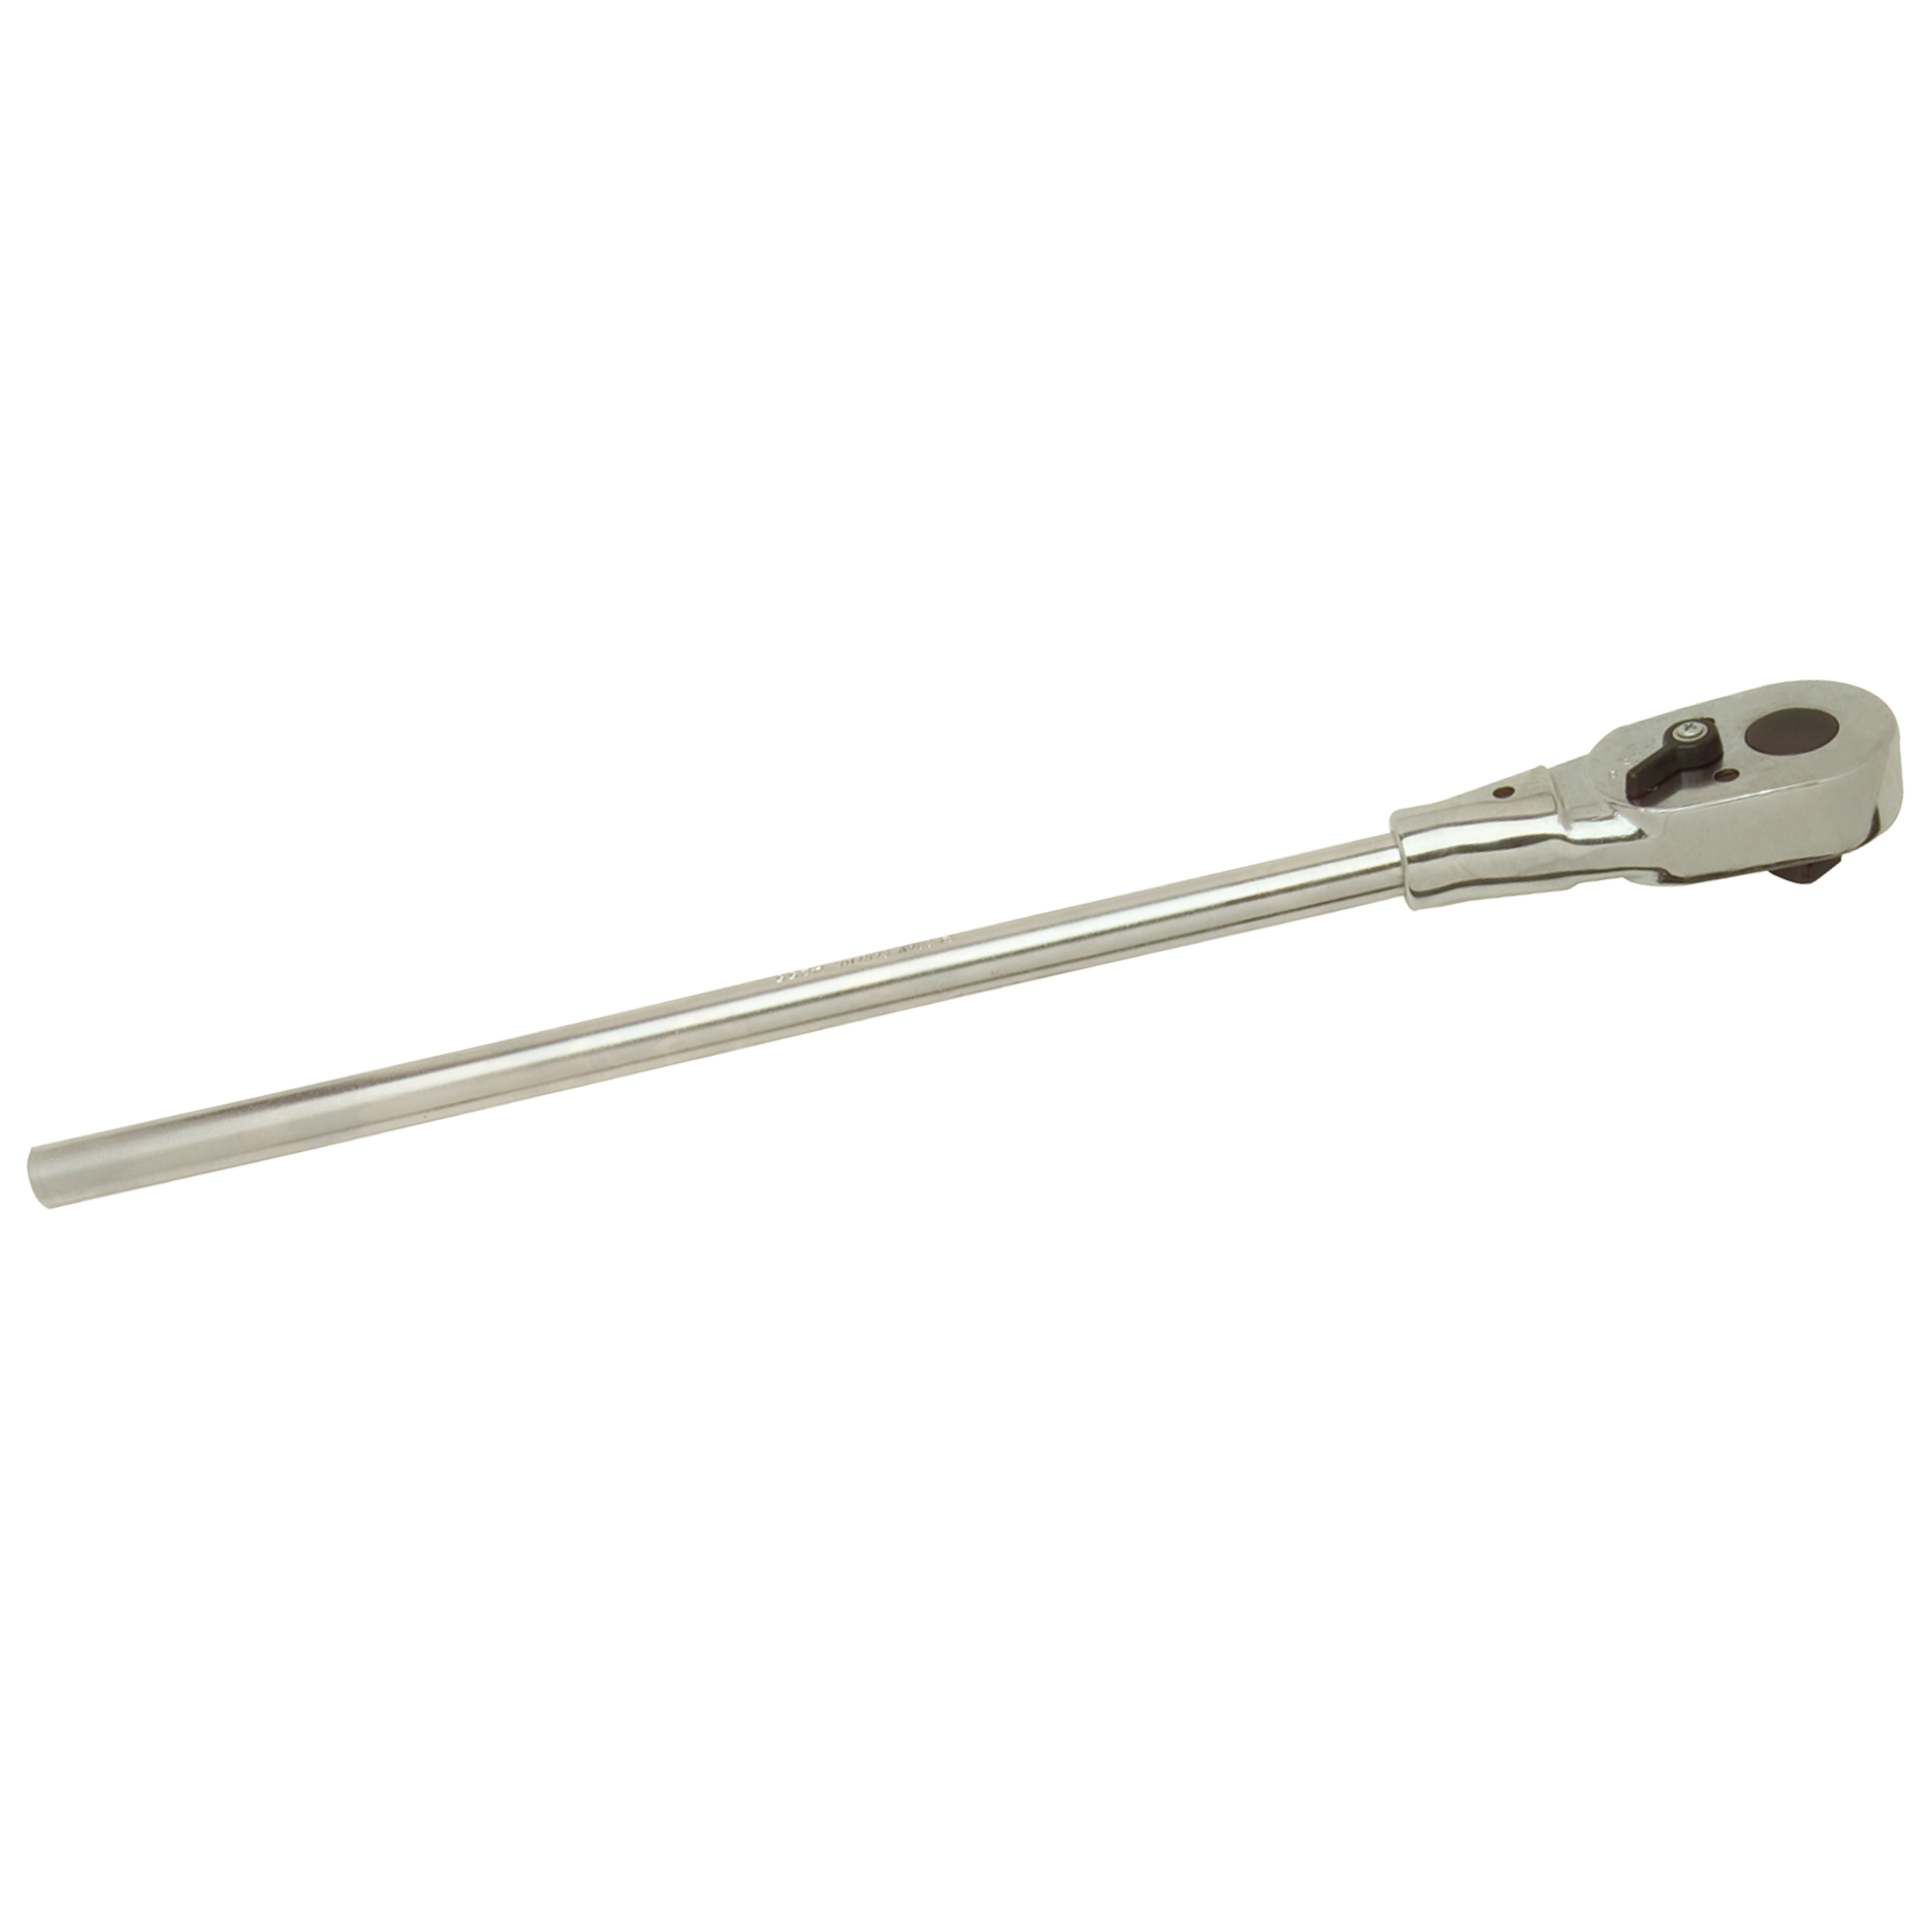 3/4" Drive Ratchet Head with Handle